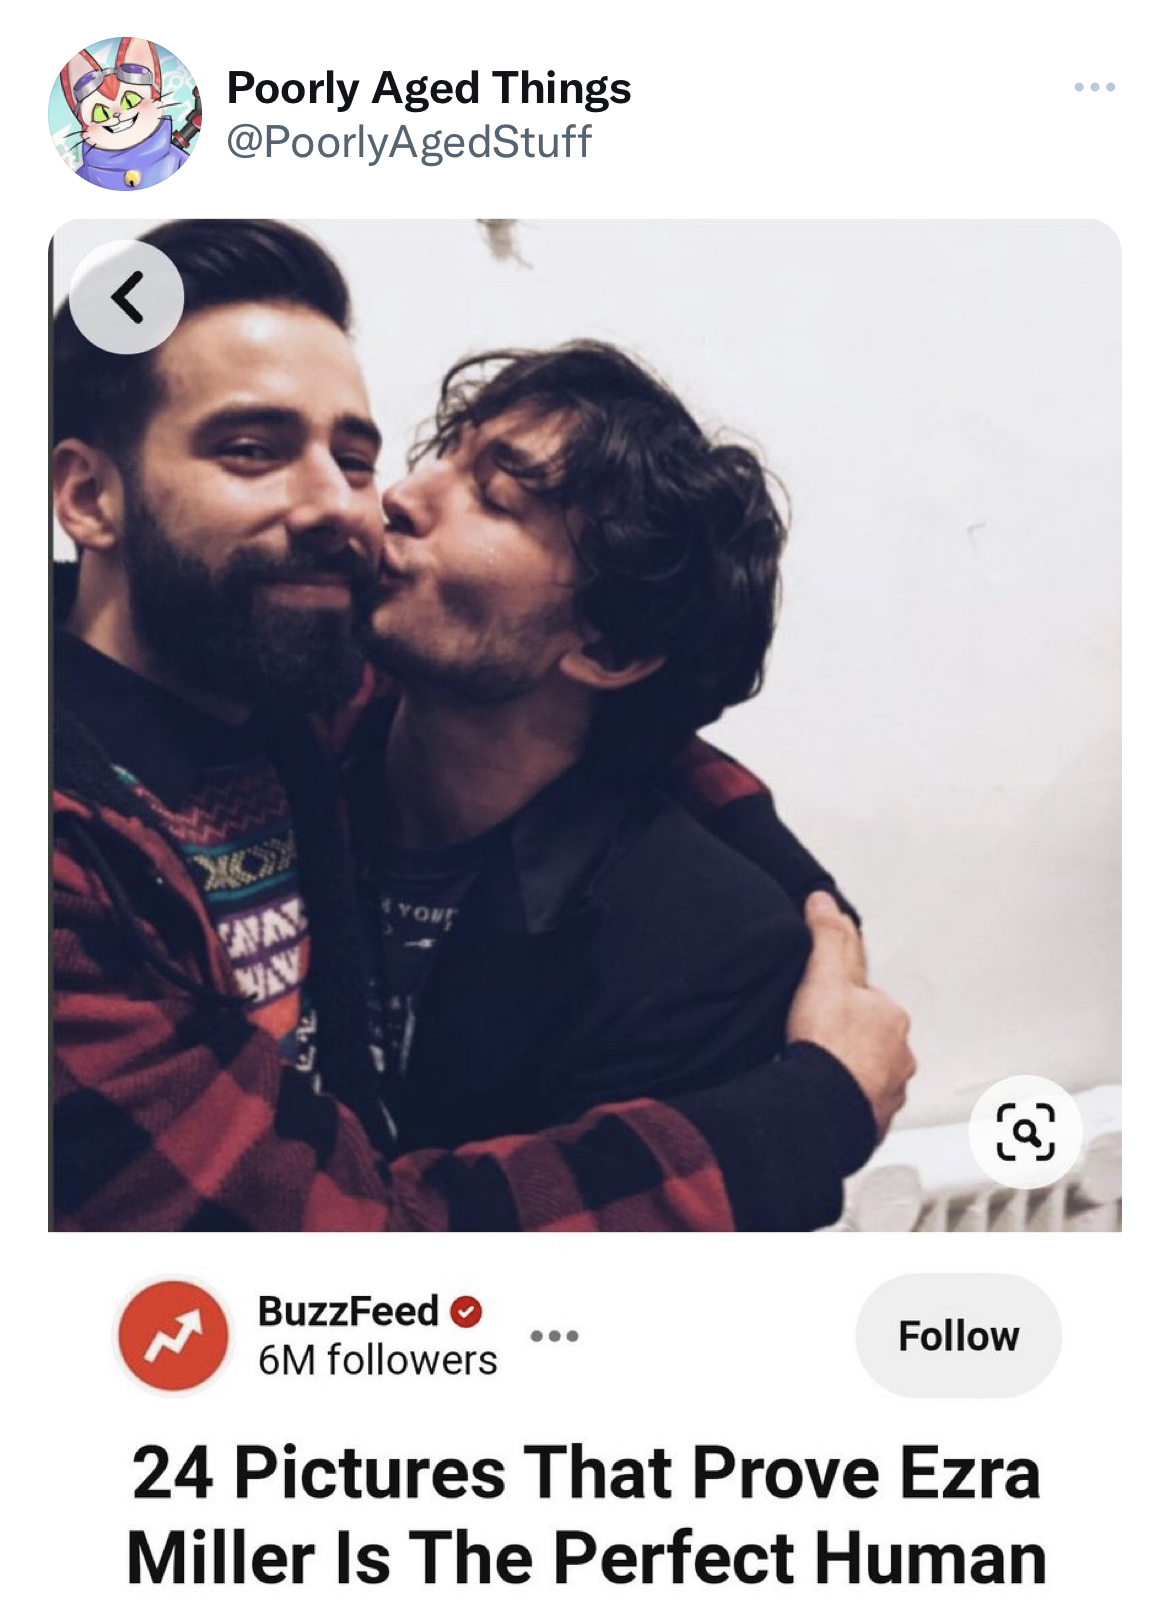 "The Perfect Human." This one is even sweeter because it's BuzzFeed.